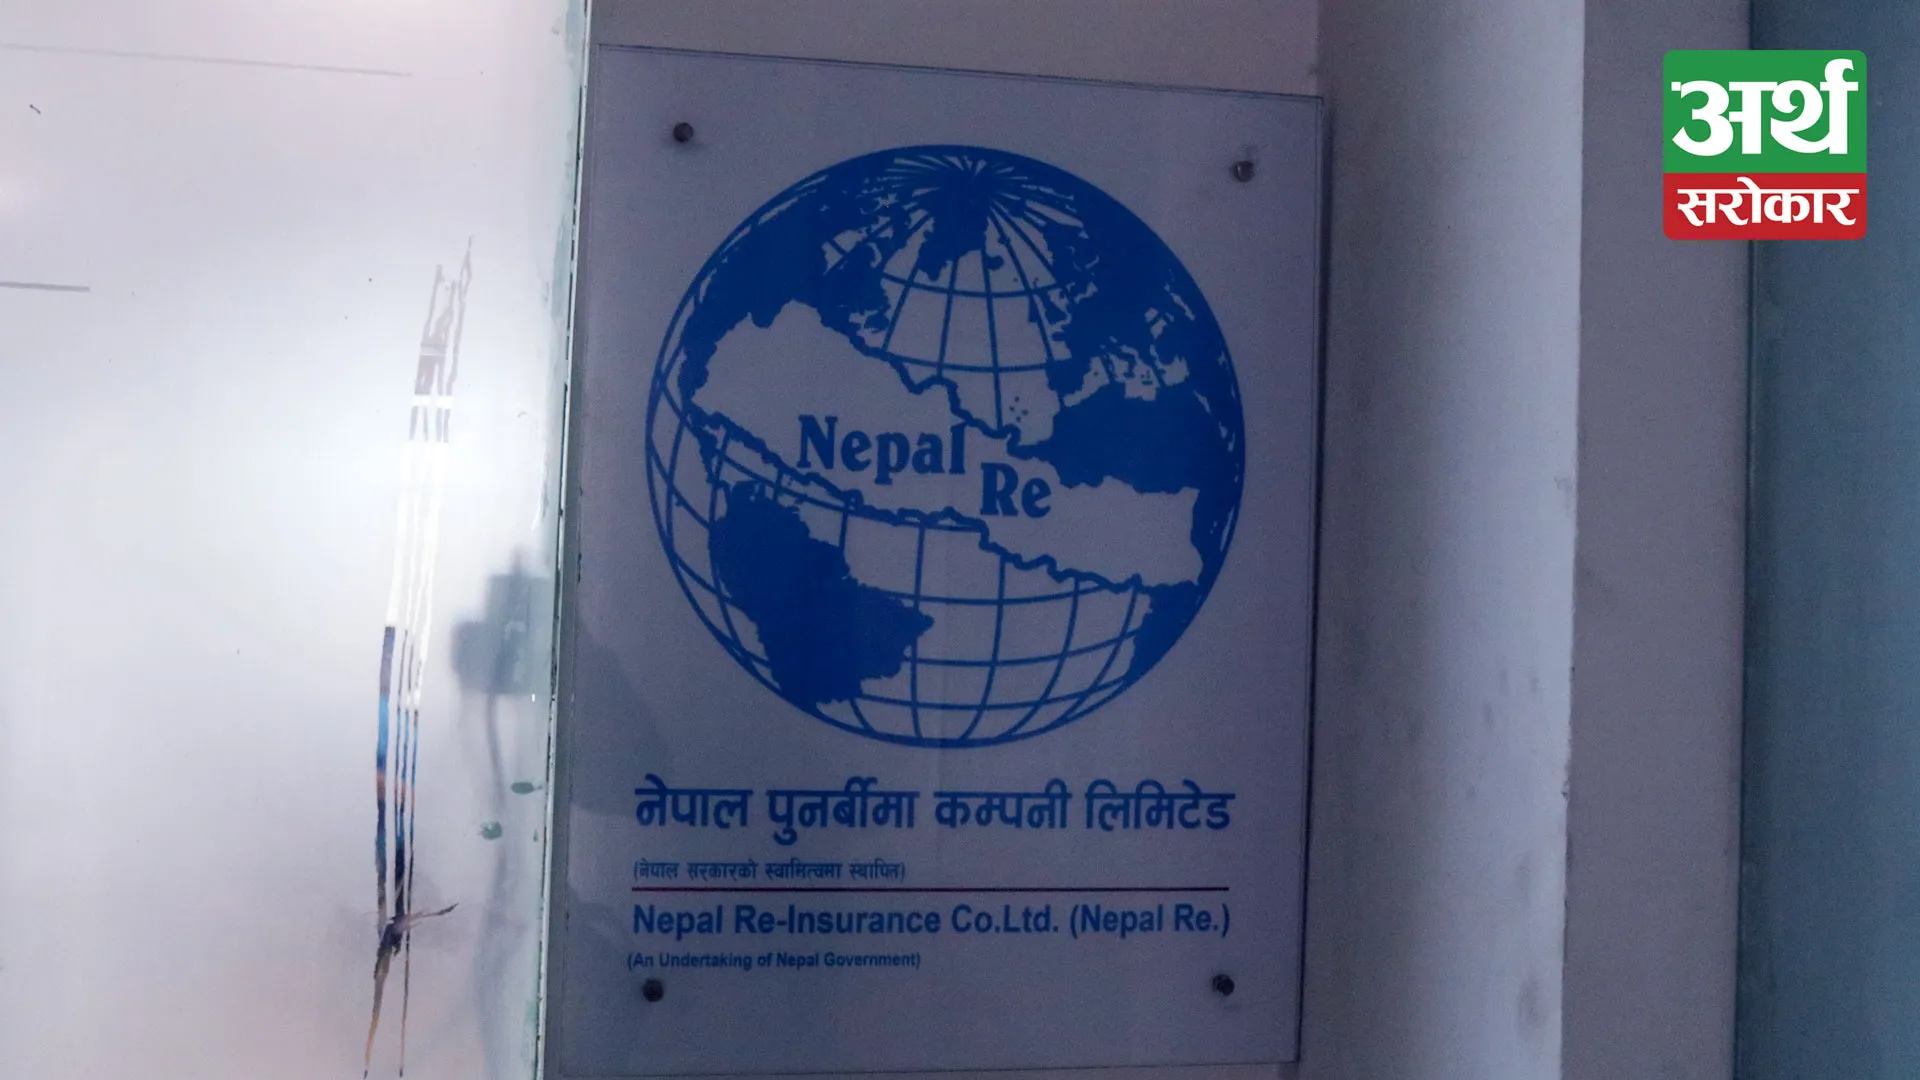 Nepal reinsurance company opened the sale of its founder shares